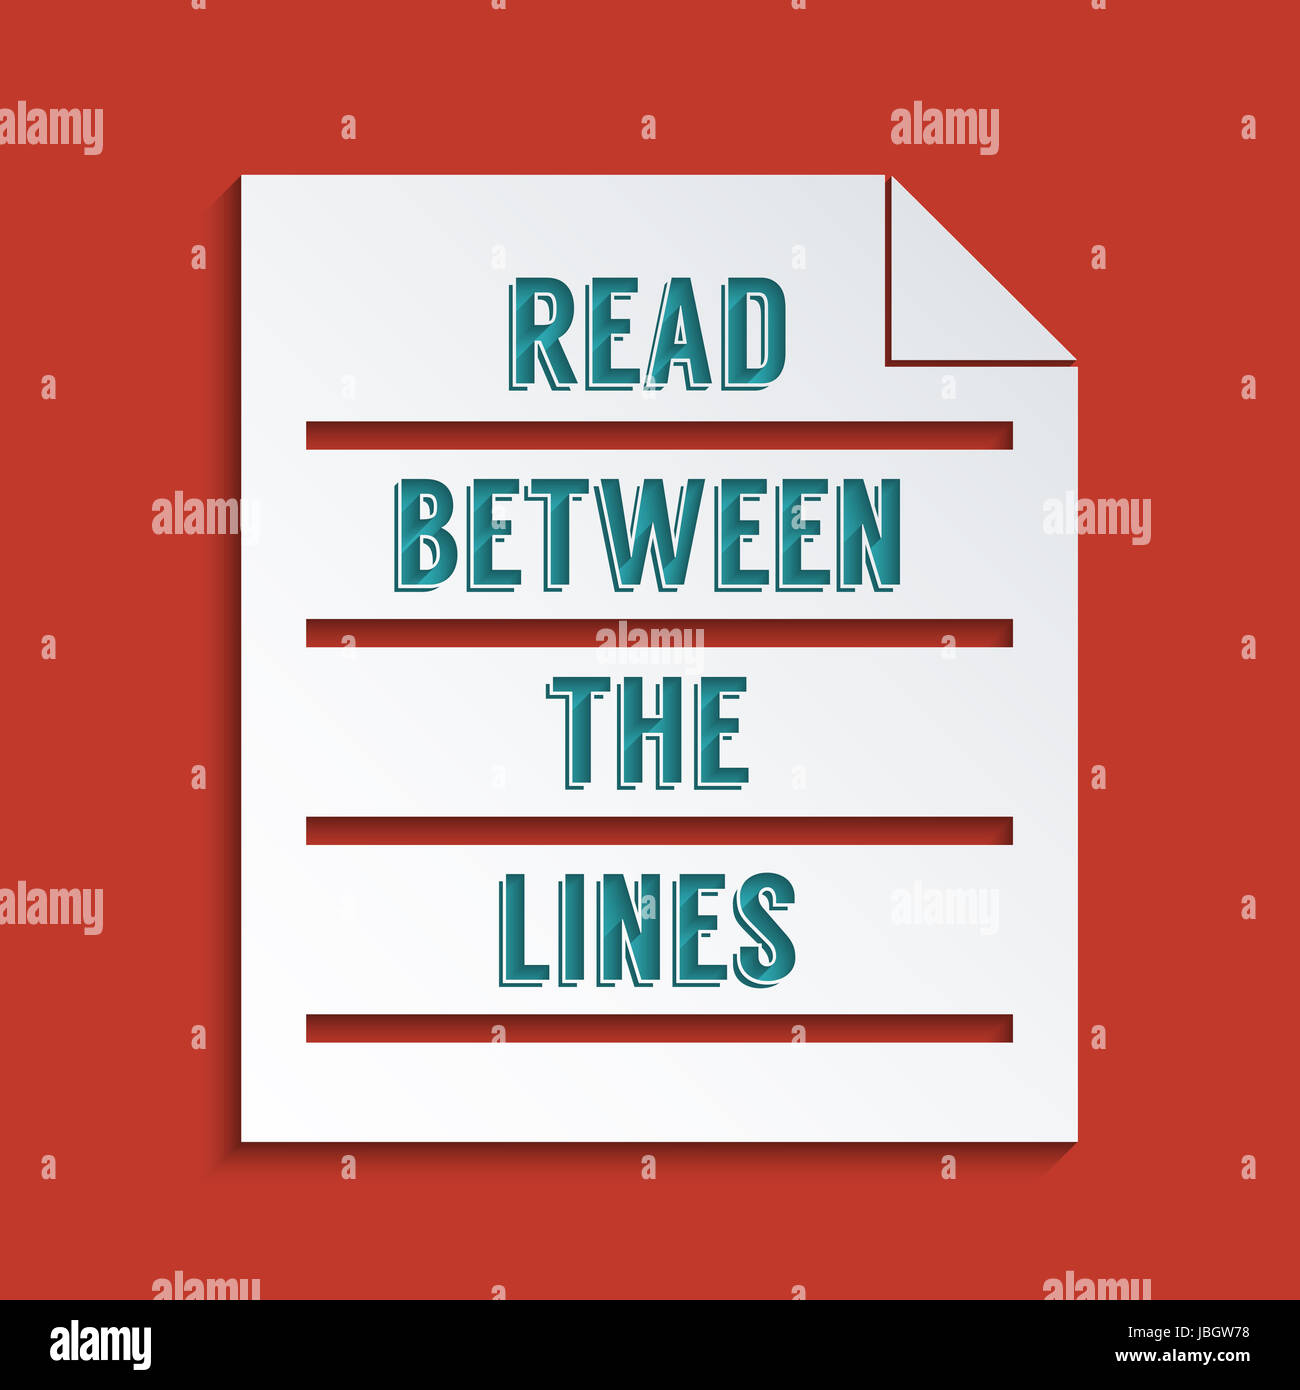 Concept for Reading between the lines. Abstract background design. Stock Photo